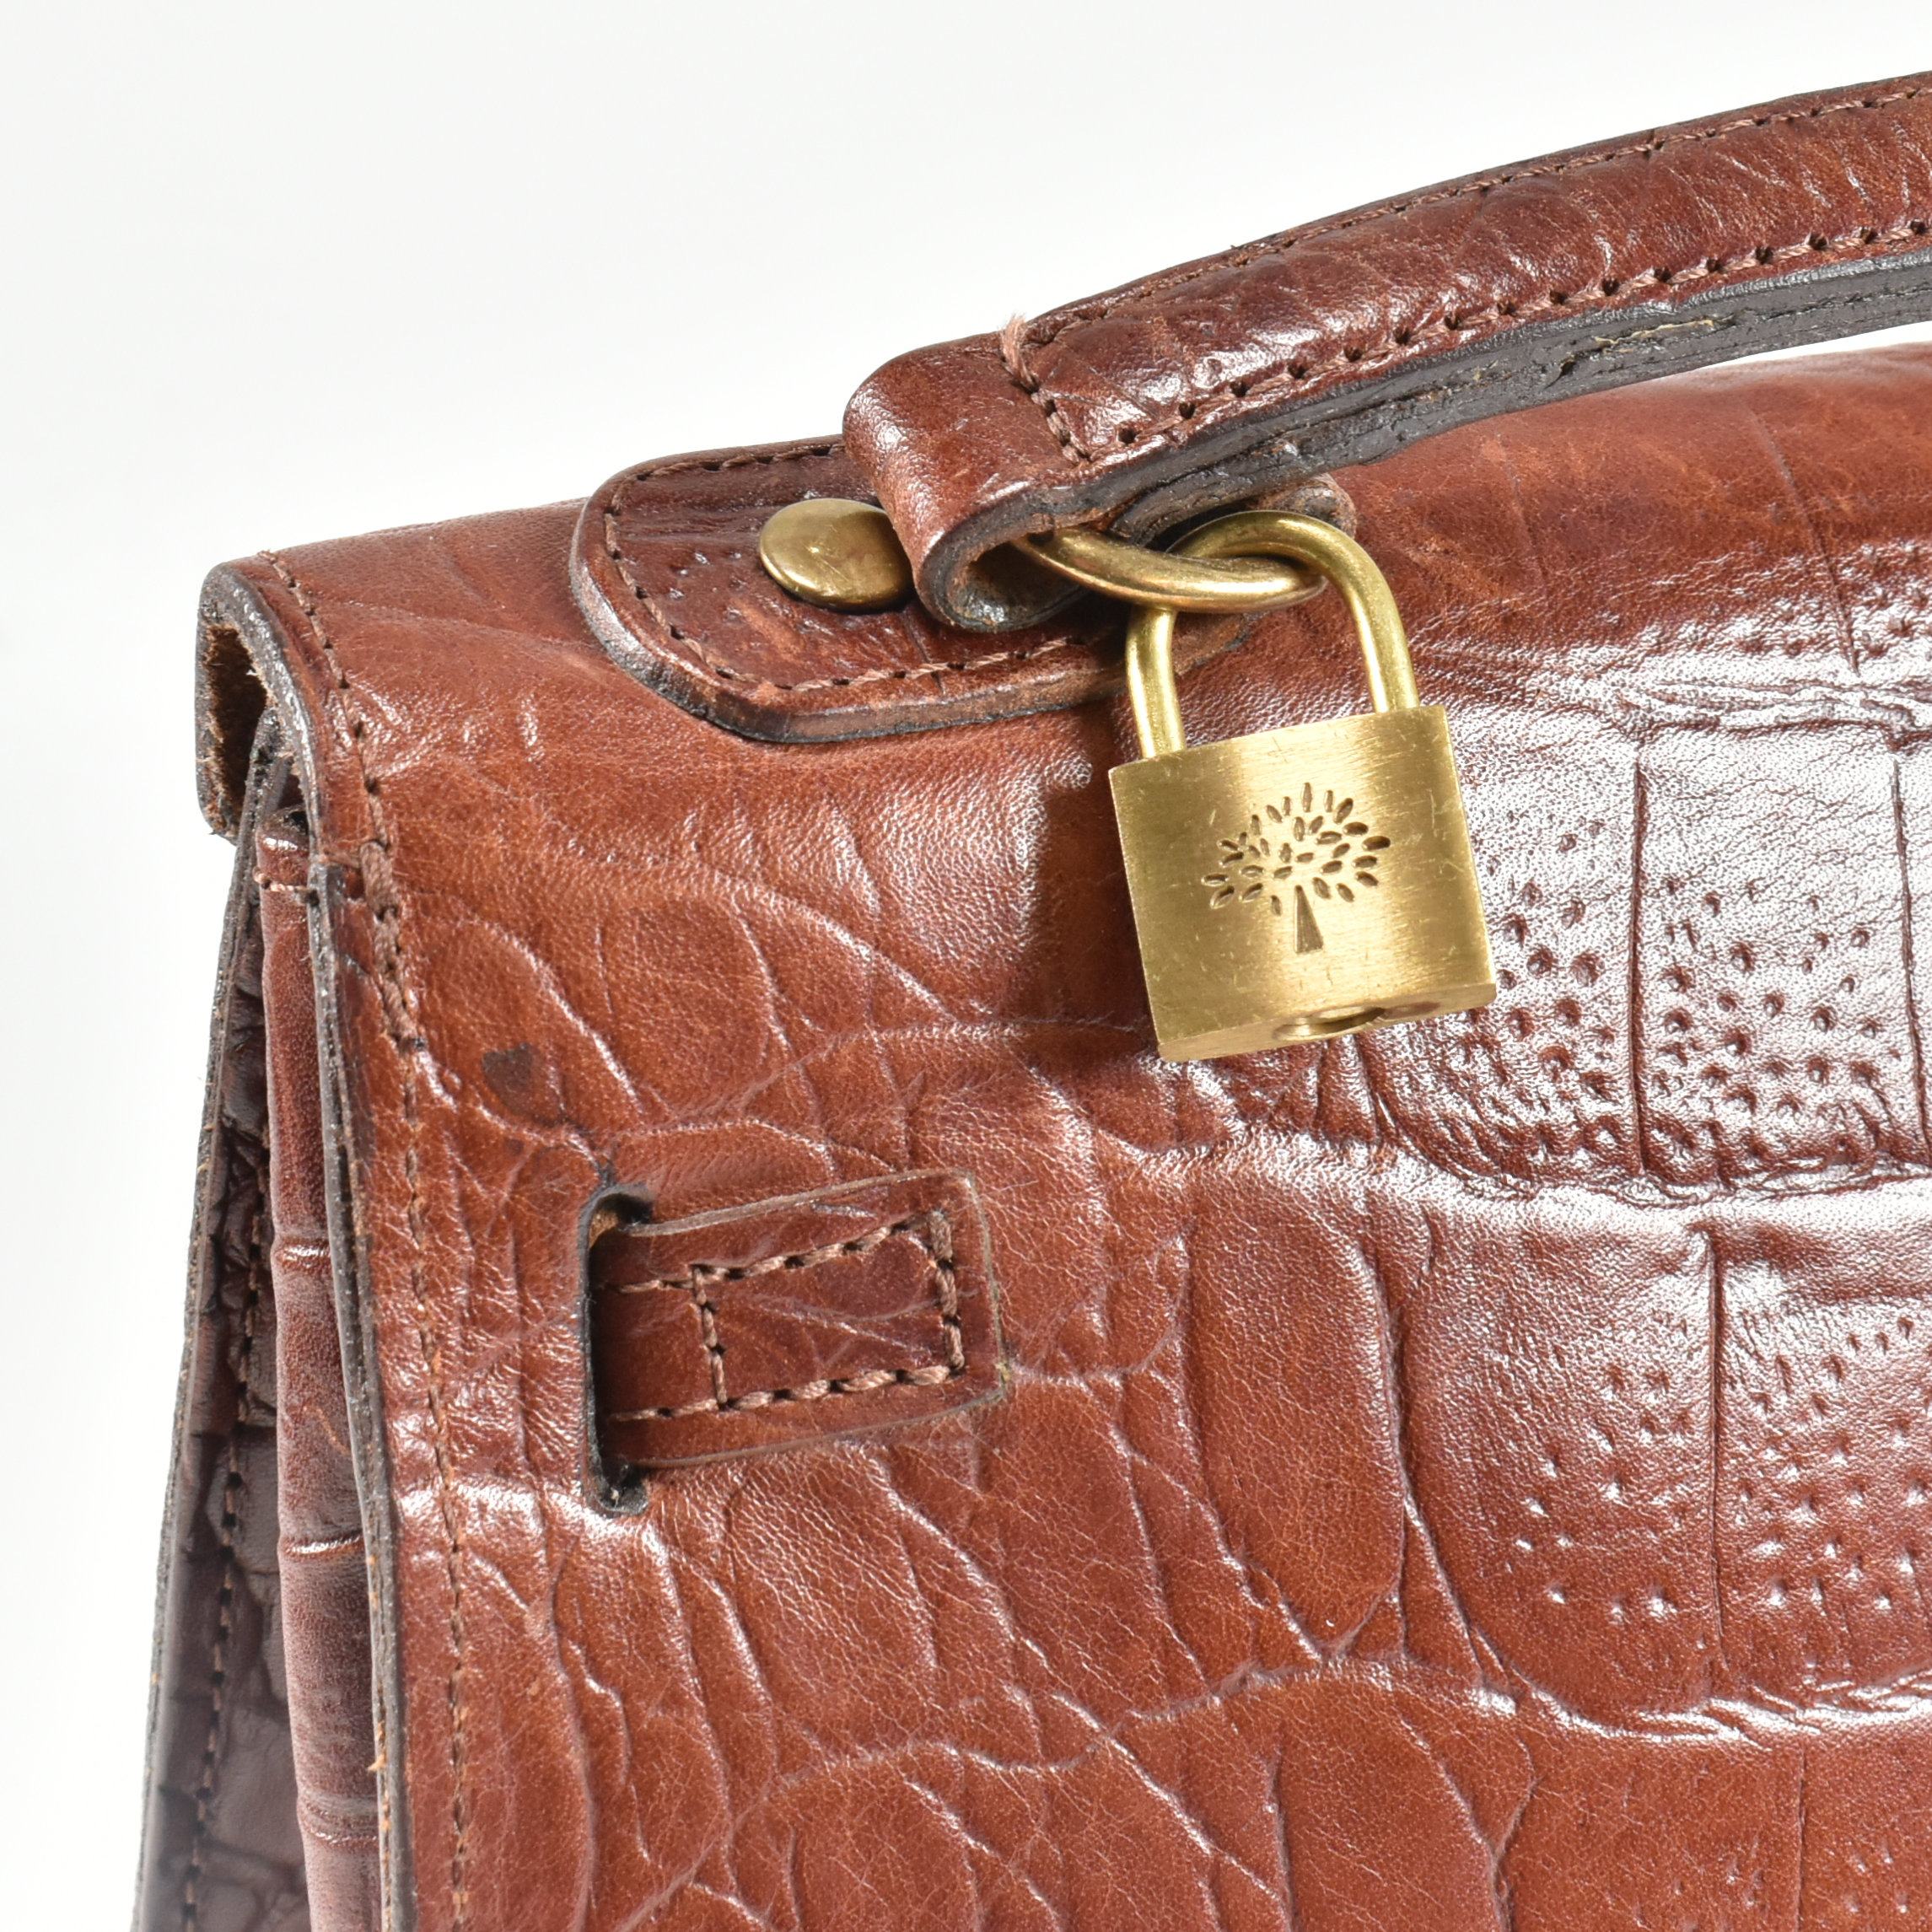 MULBERRY BROWN LEATHER KELLY BAG WITH CROSSBODY STRAP - Image 6 of 9